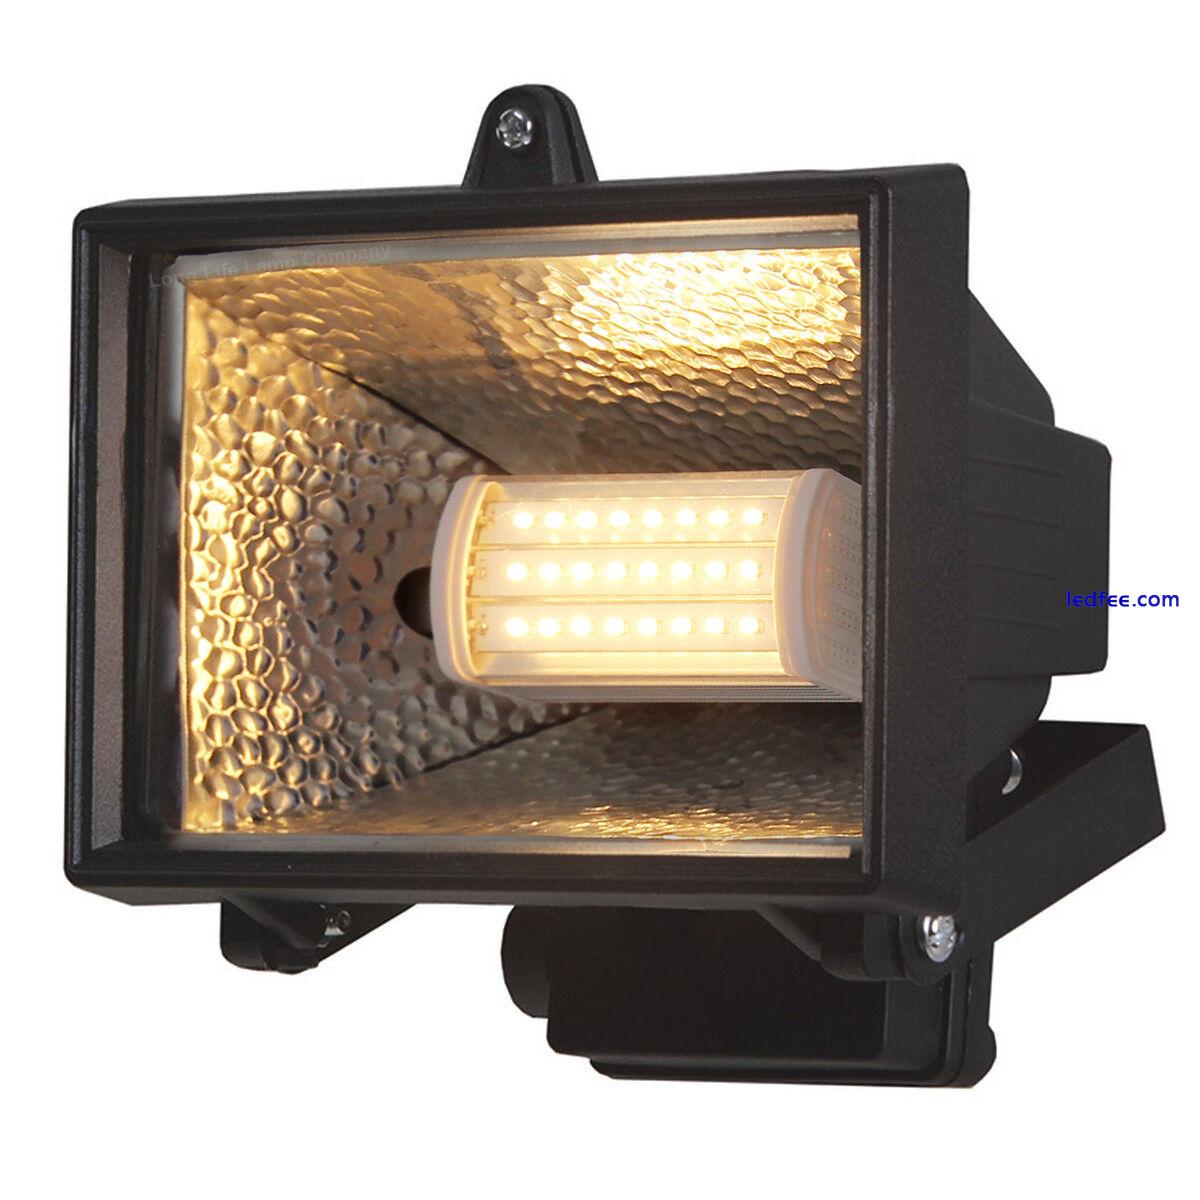 R7s J118 10W SMD LED Flood Light Bulb Replacement for Halogen Linear Tubes 118mm 5 